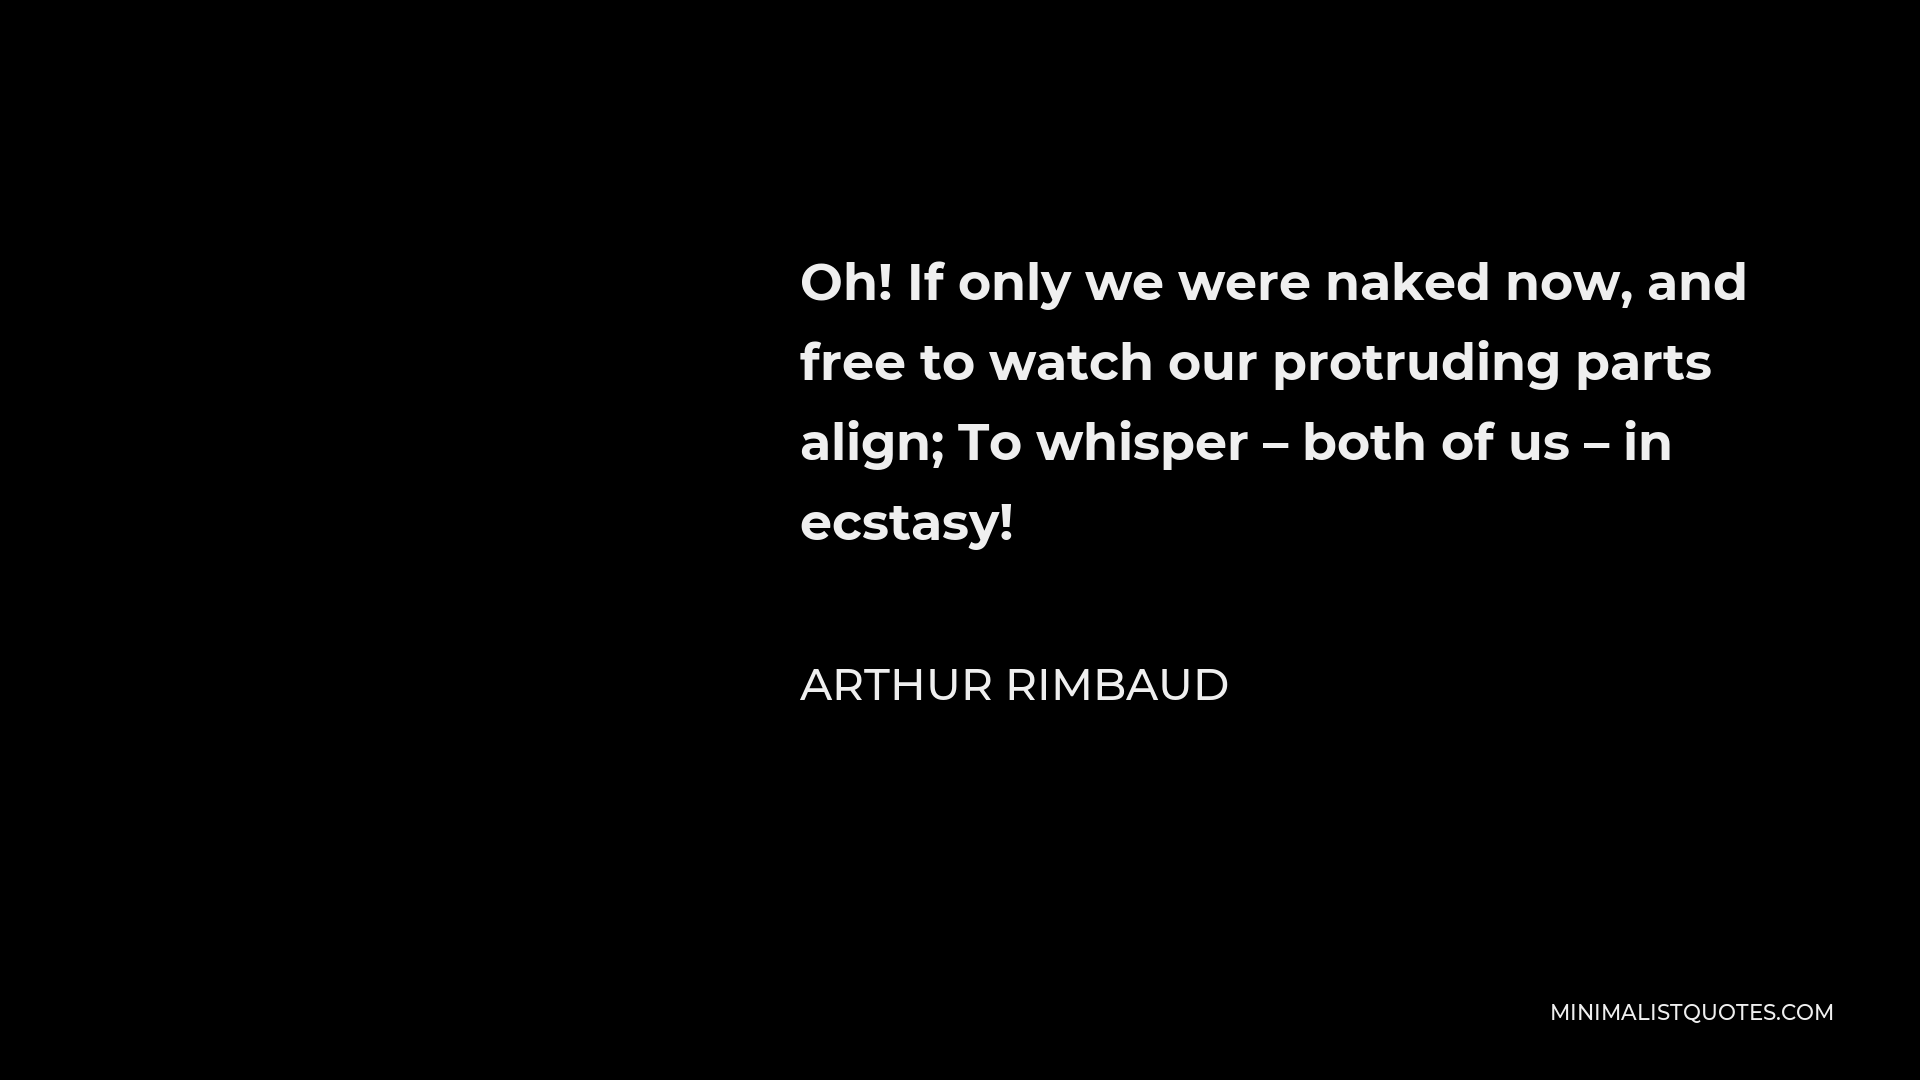 Arthur Rimbaud Quote - Oh! If only we were naked now, and free to watch our protruding parts align; To whisper – both of us – in ecstasy!